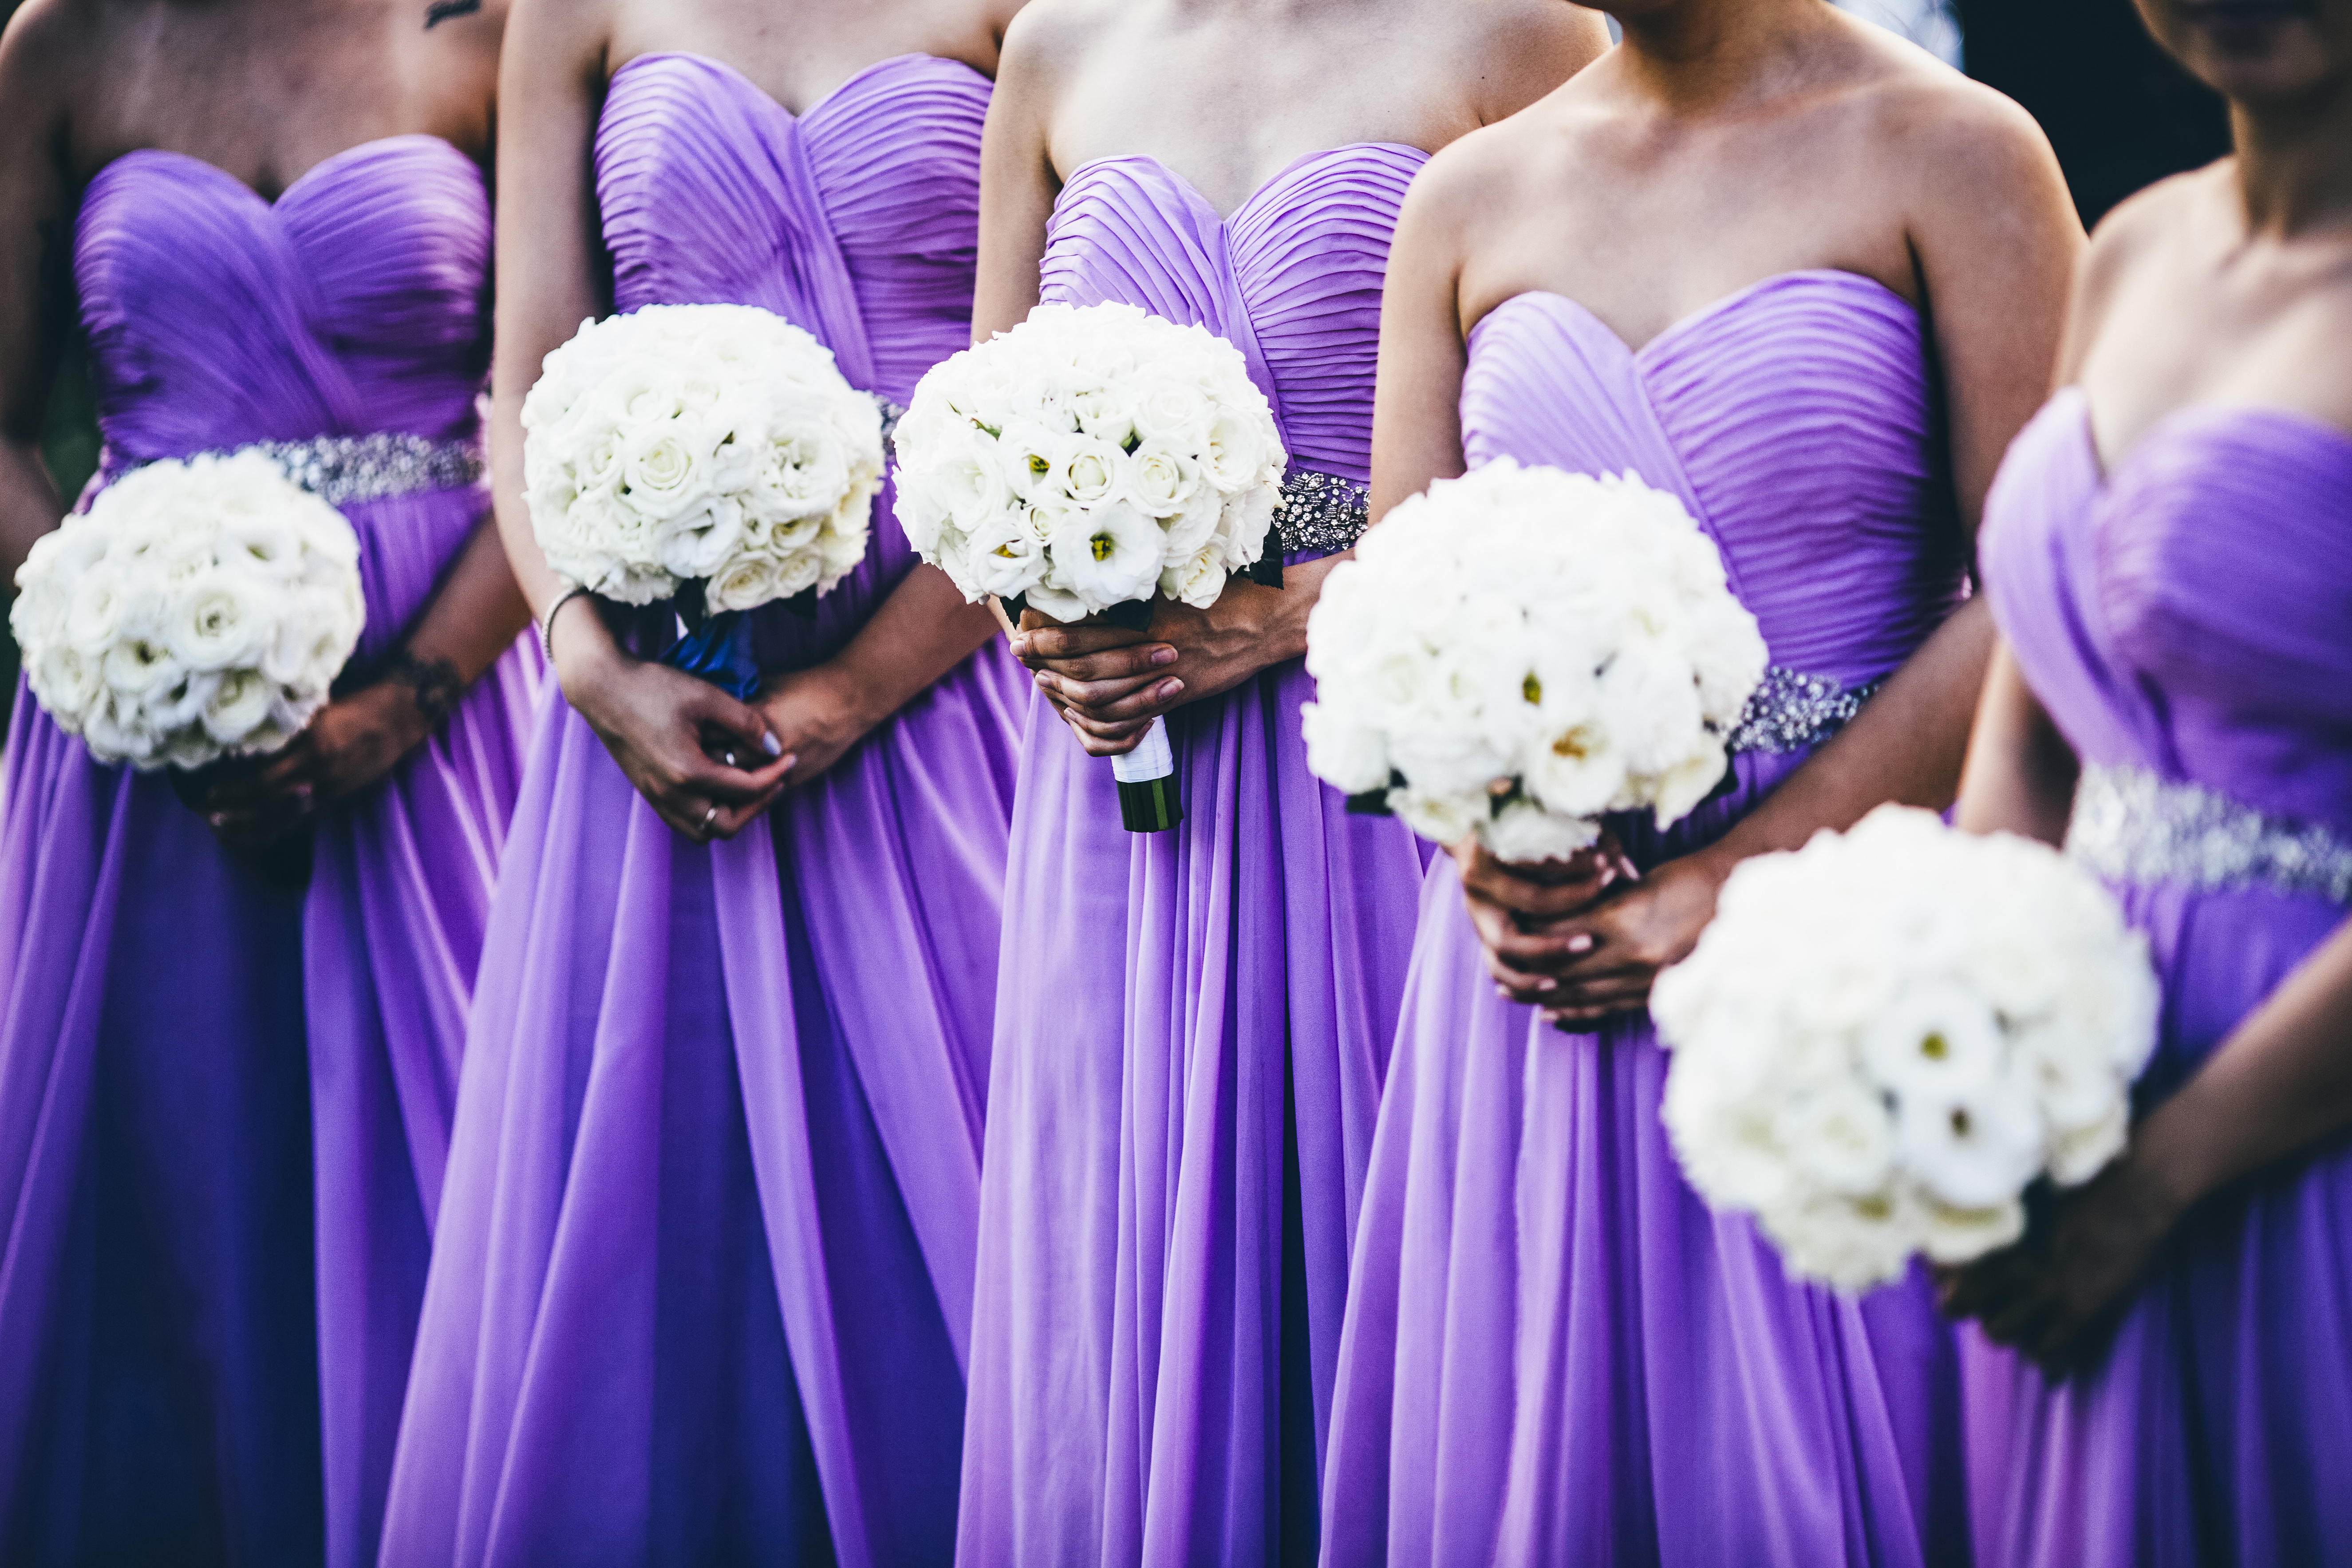 Bridesmaids wearing purple dresses | Source: Getty Images